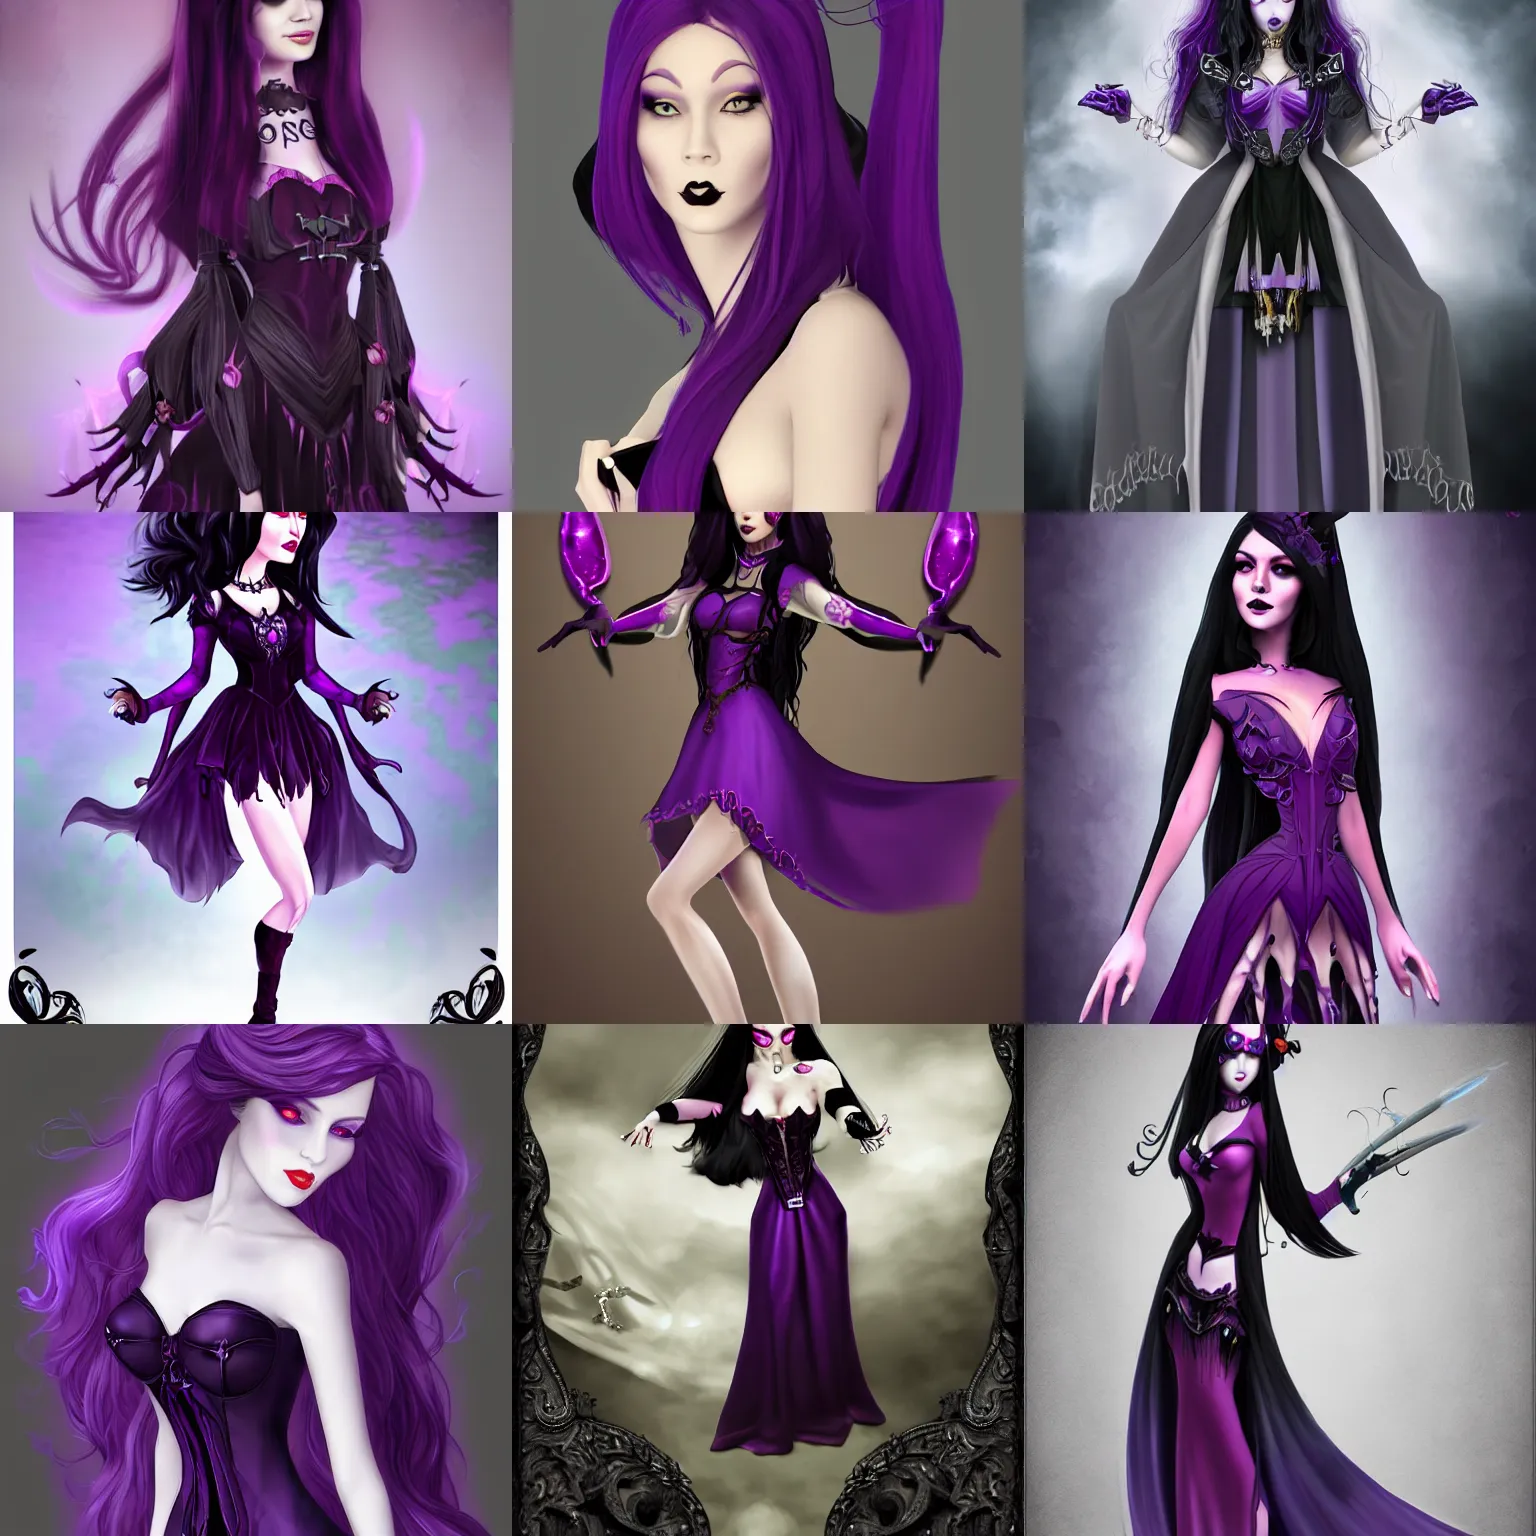 Prompt: a woman in a purple dress with long black hair, a character portrait by xul solar, featured on polycount, gothic art, goth, gothic, deviantart hd